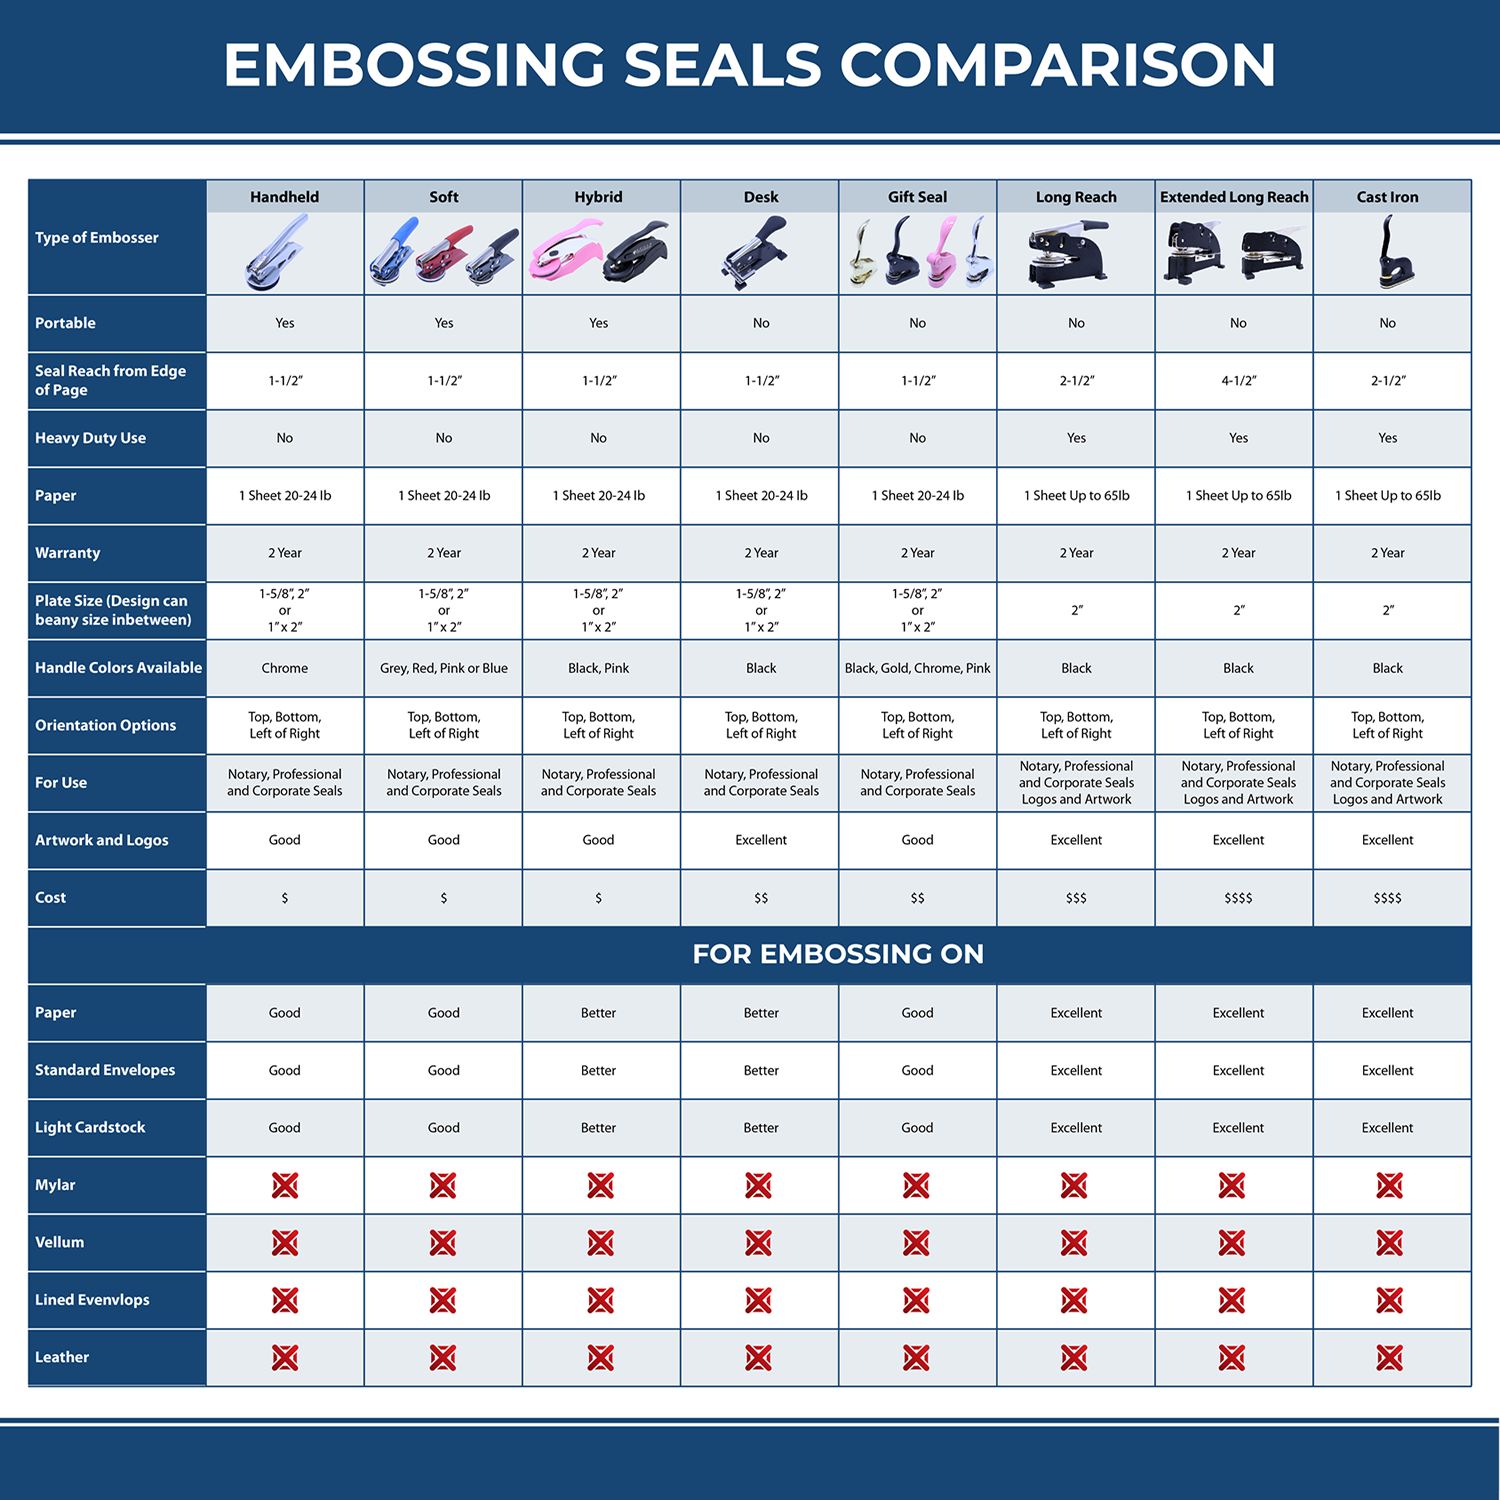 A comparison chart for the different types of mount models available for the Hybrid Arkansas Land Surveyor Seal